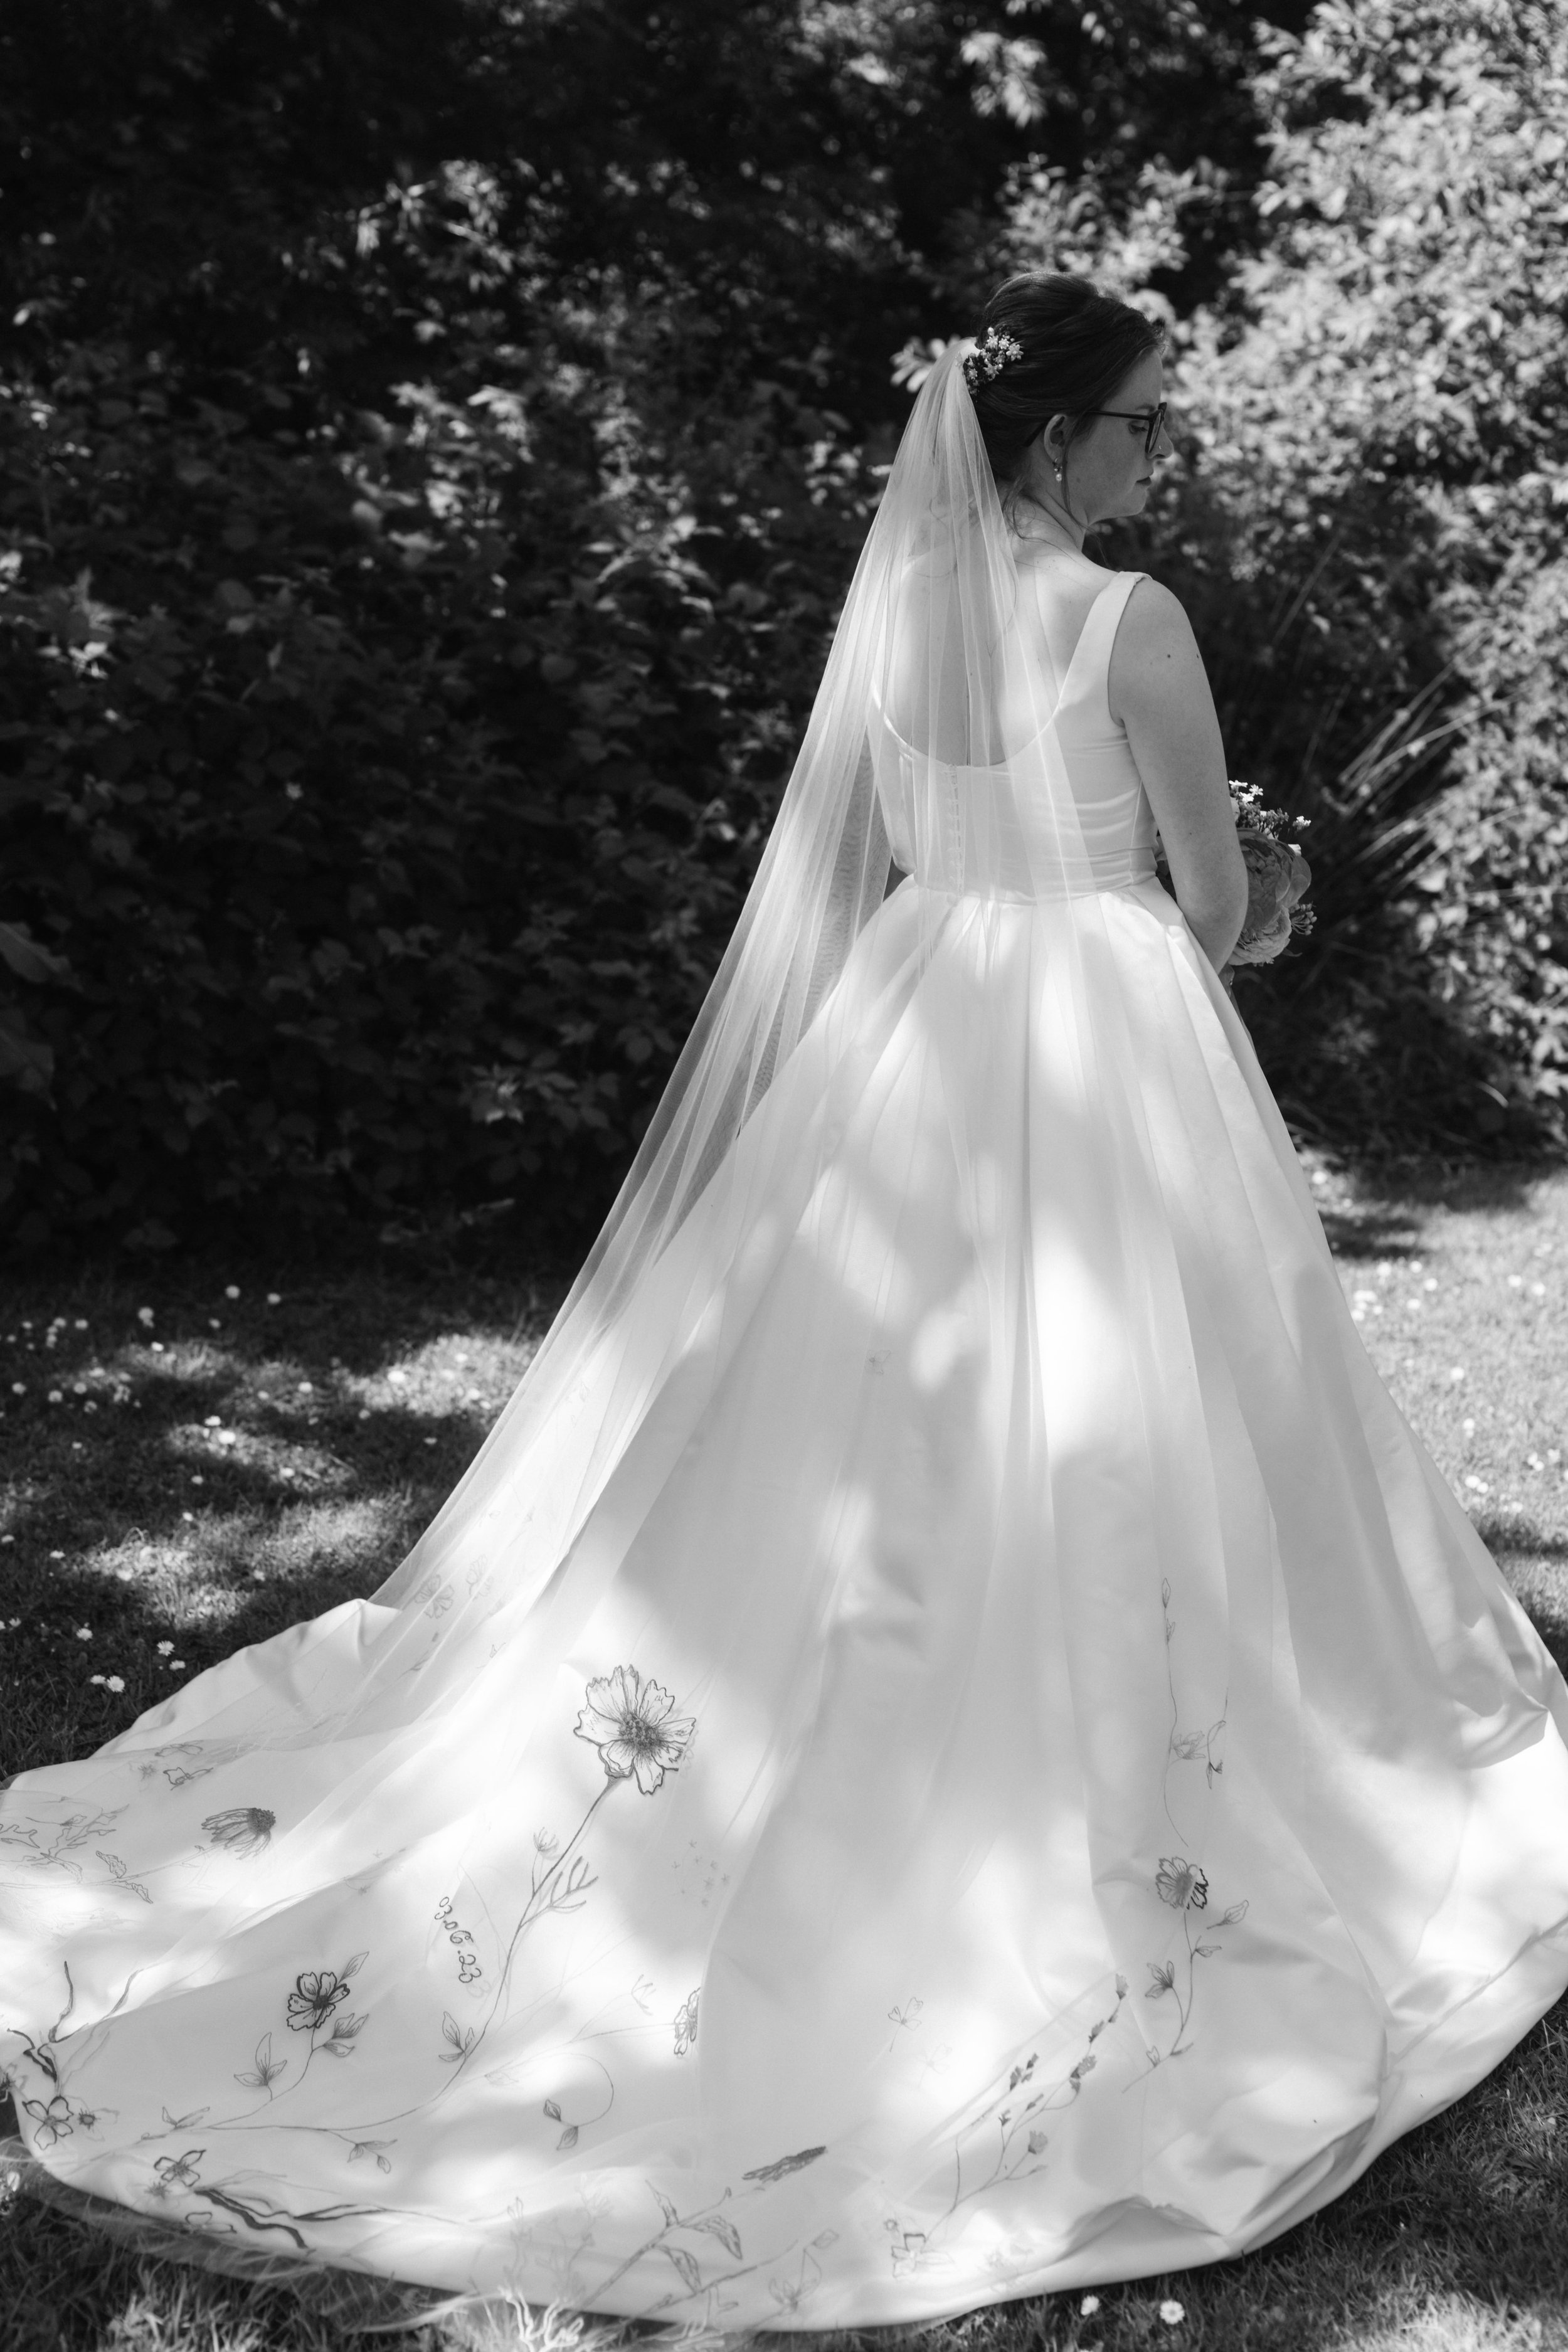  Black and white image of bride facing away wearing embroidered veil 